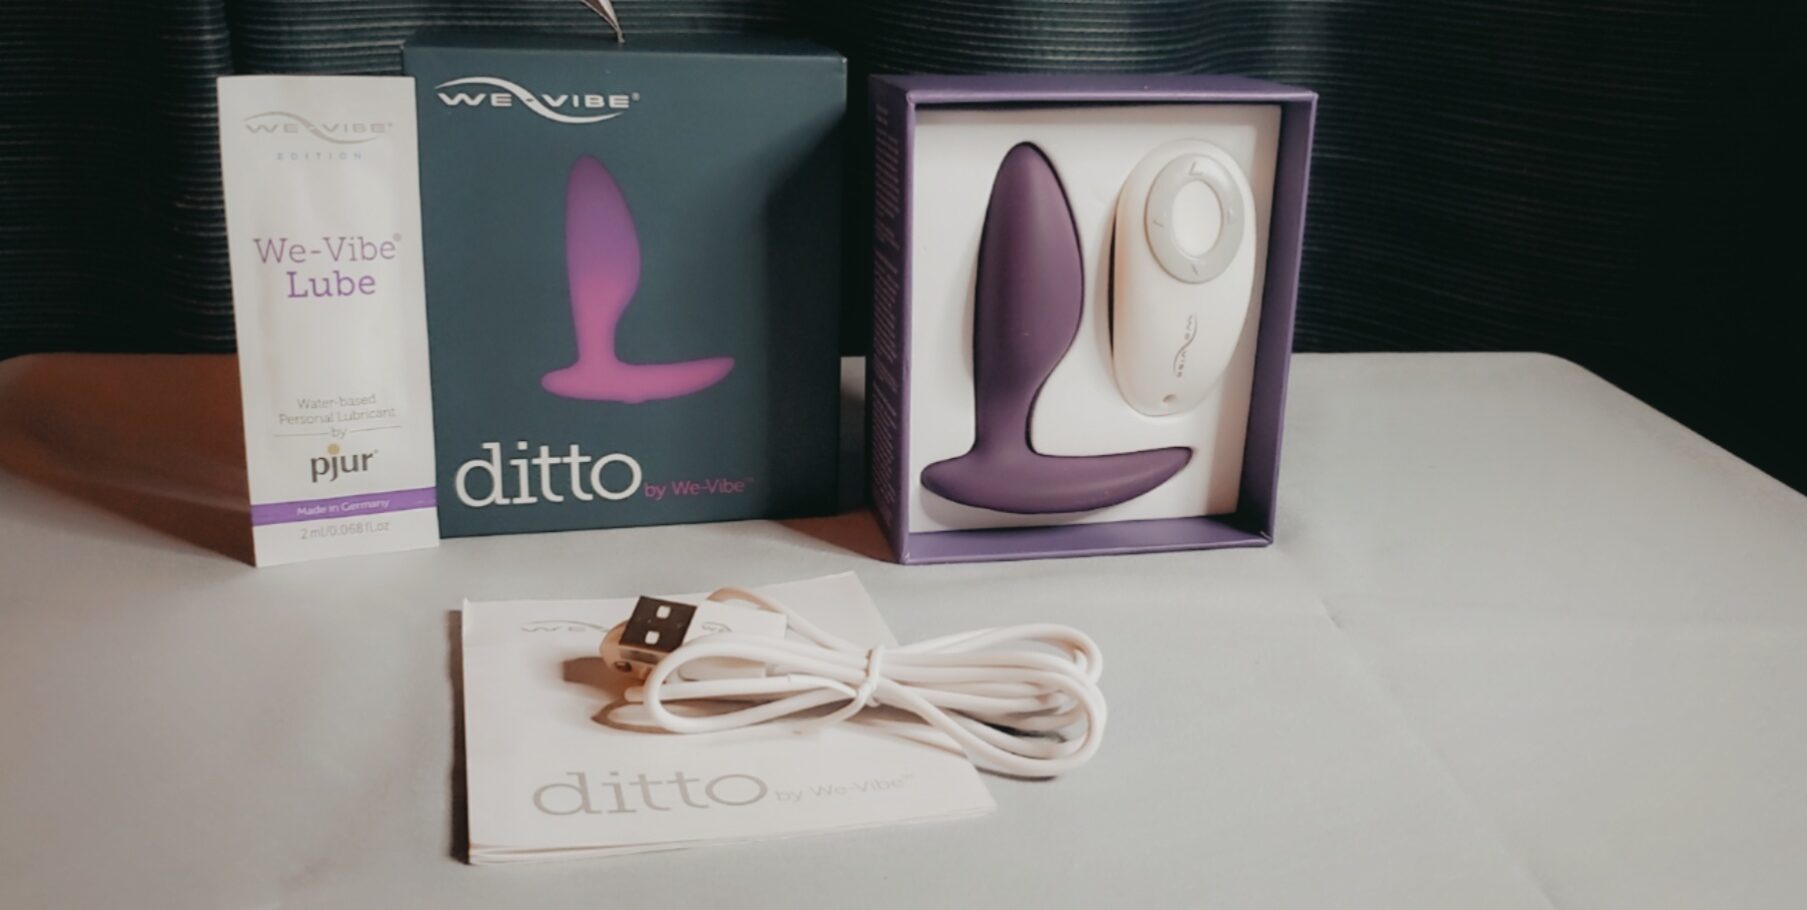 We-Vibe Ditto . Slide 3